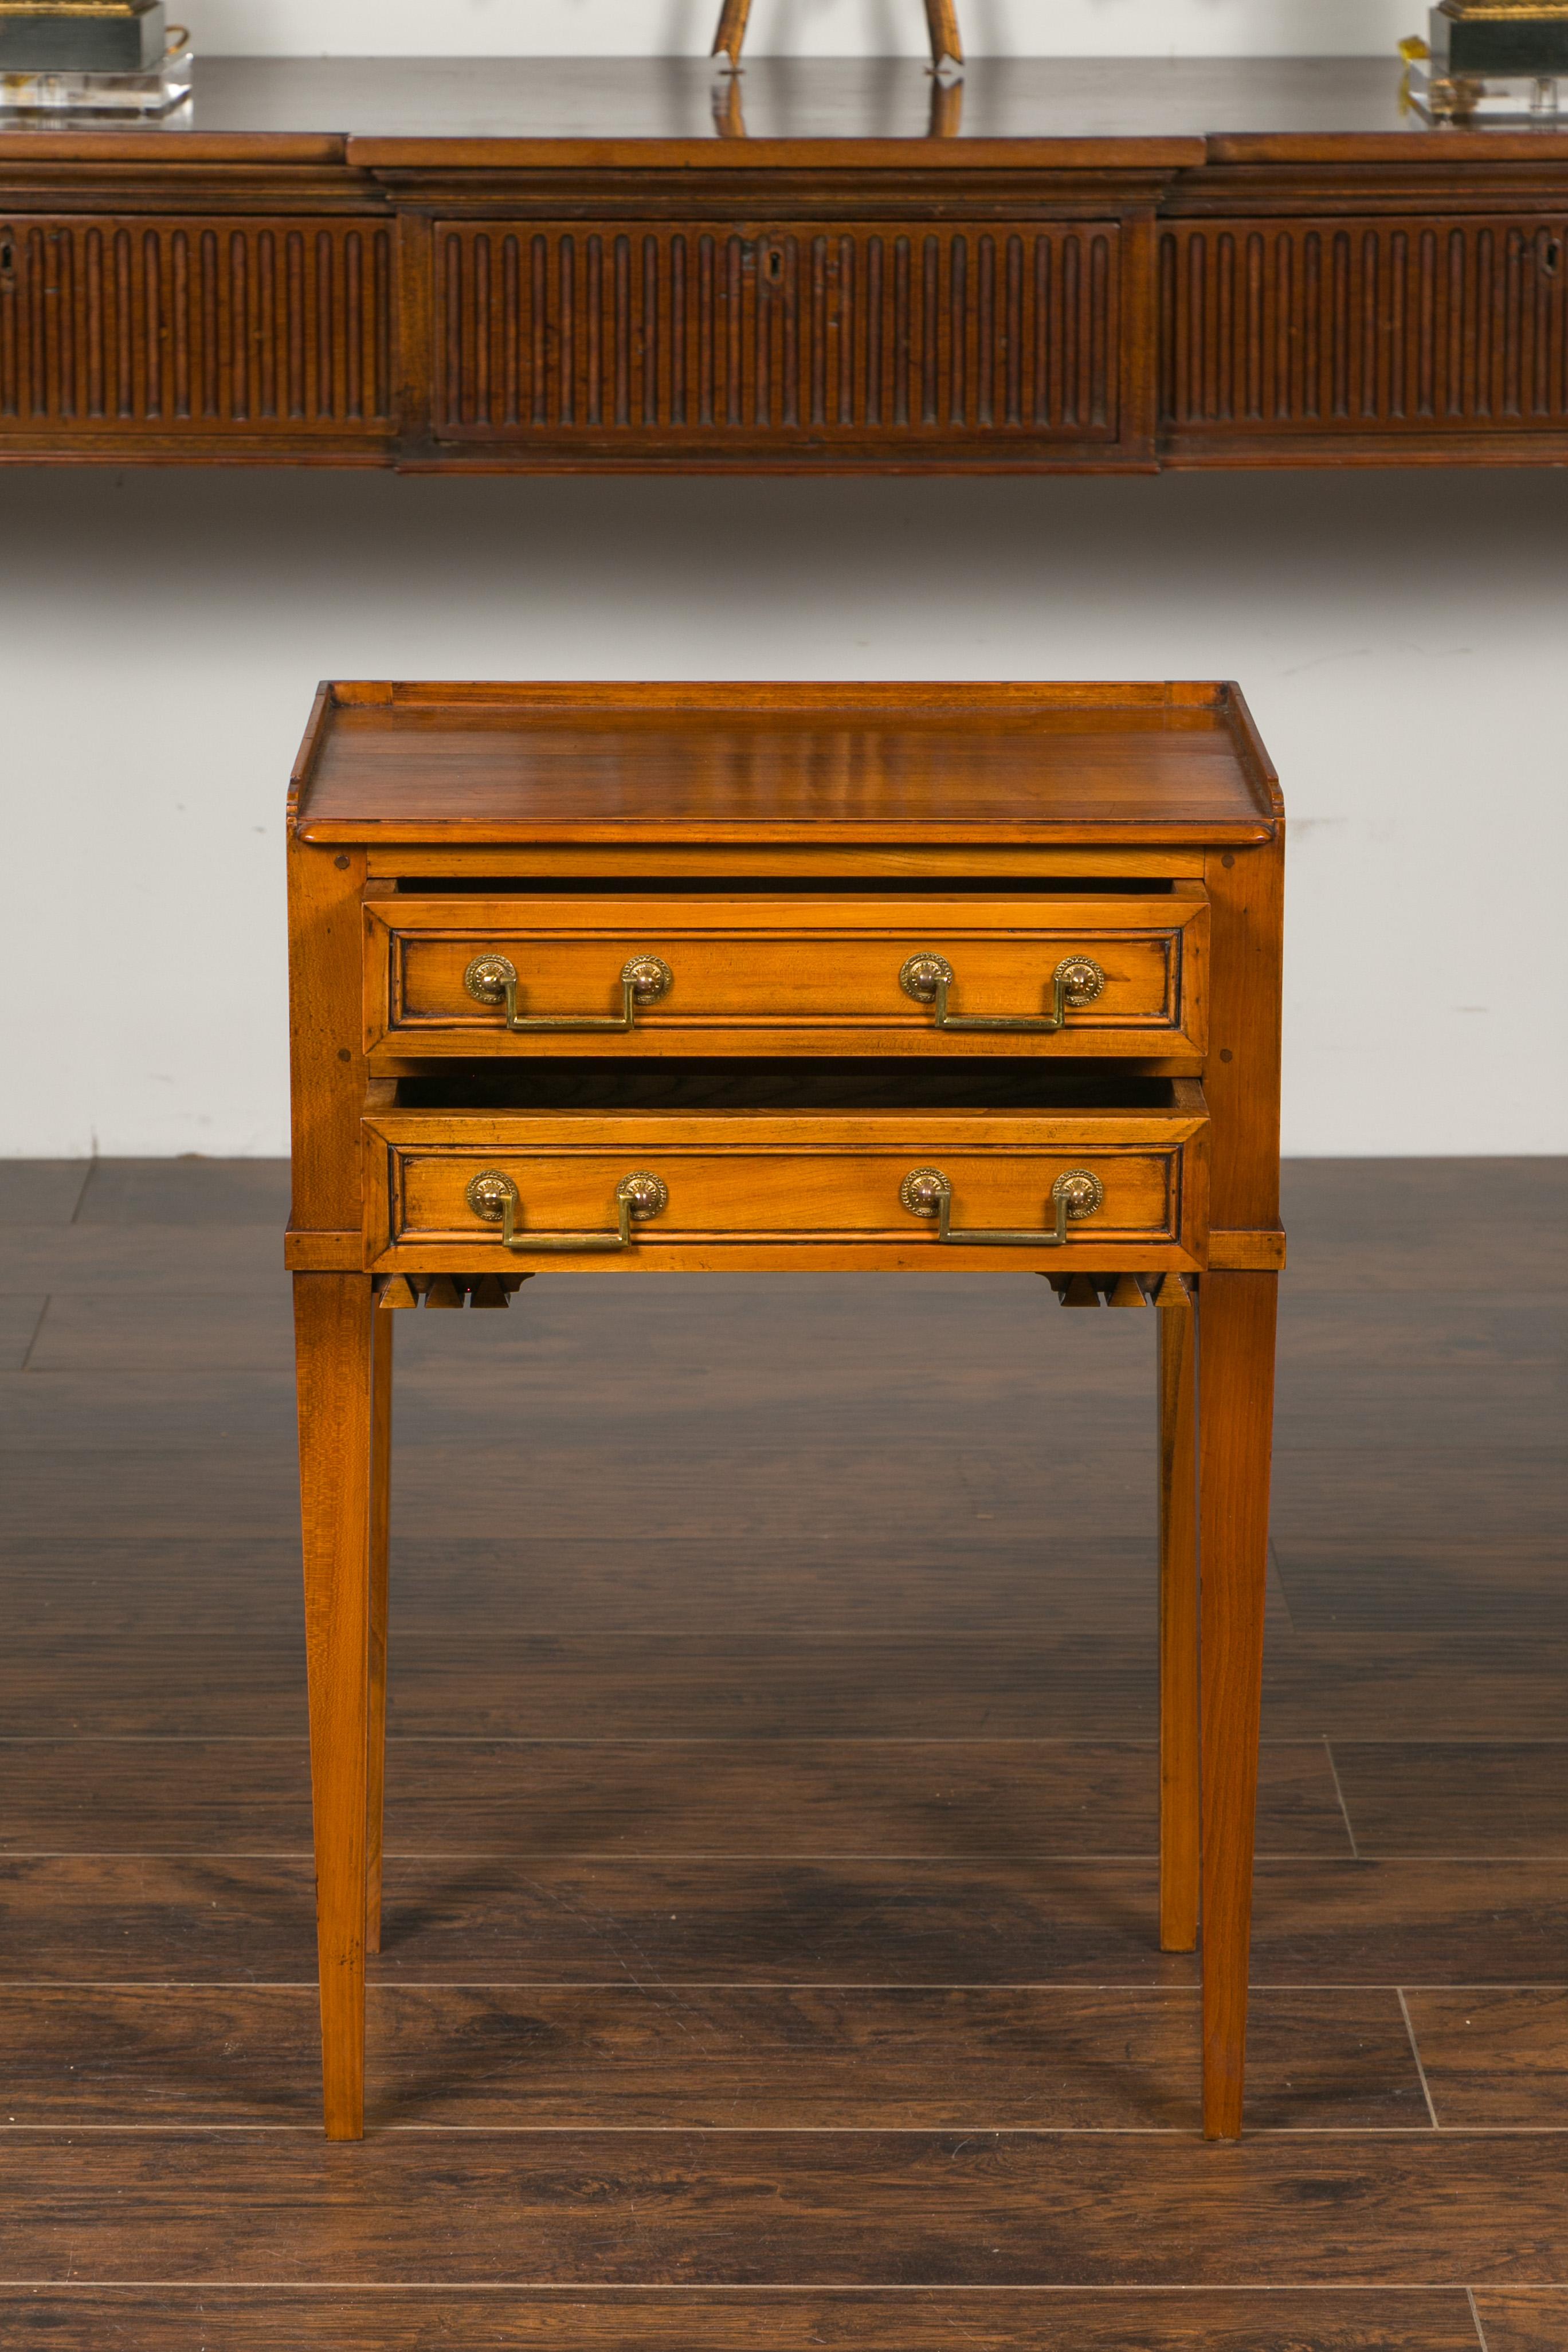 20th Century Vintage French Neoclassical Style Walnut Side Table with Carved Pyramidal Motifs